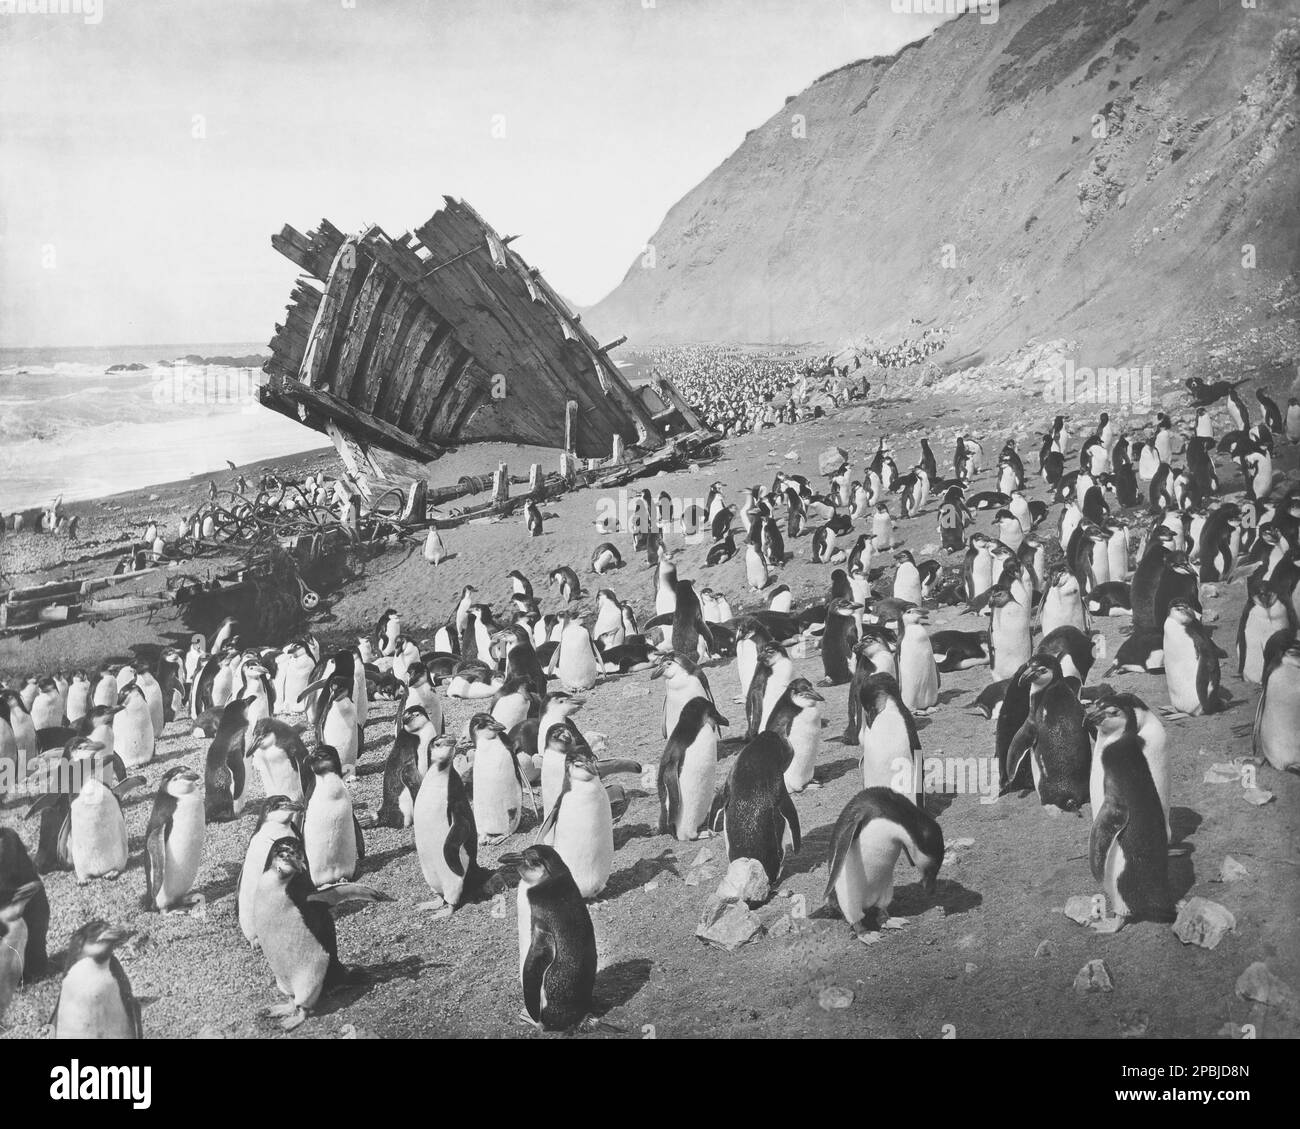 Adelie penguins gather at the wreck of the schooner Gratitude which went aground on Macquarie Island in 1898. Stock Photo